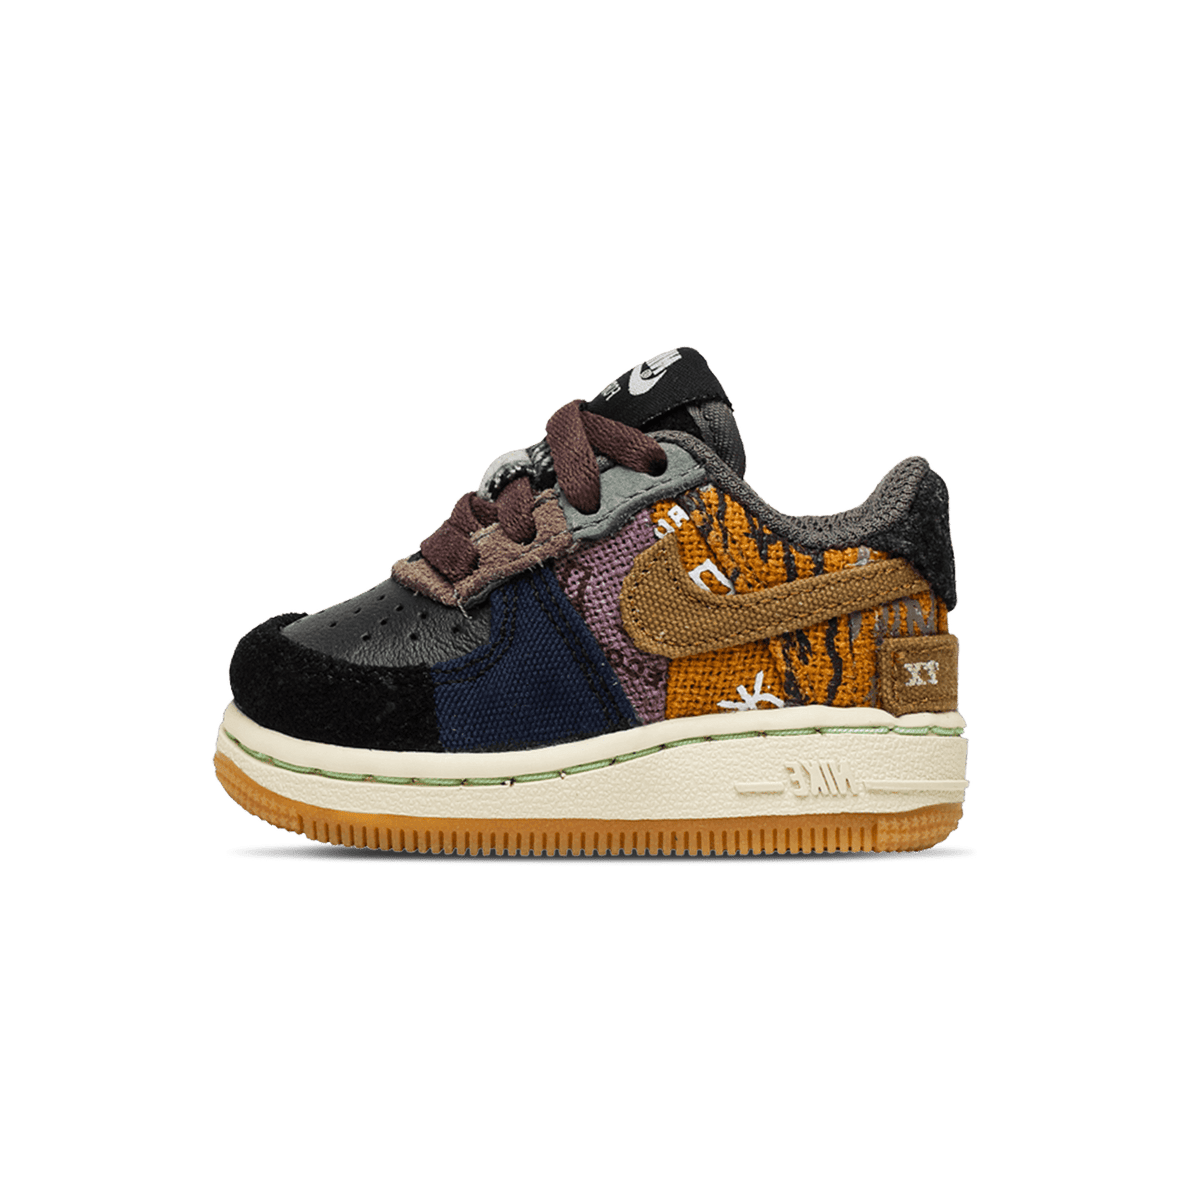 Travis Scott x Air Force mask 1 Low Toddler Size 'Cactus Jack' - CT0911 900  – RvceShops - nike dunks for sale online